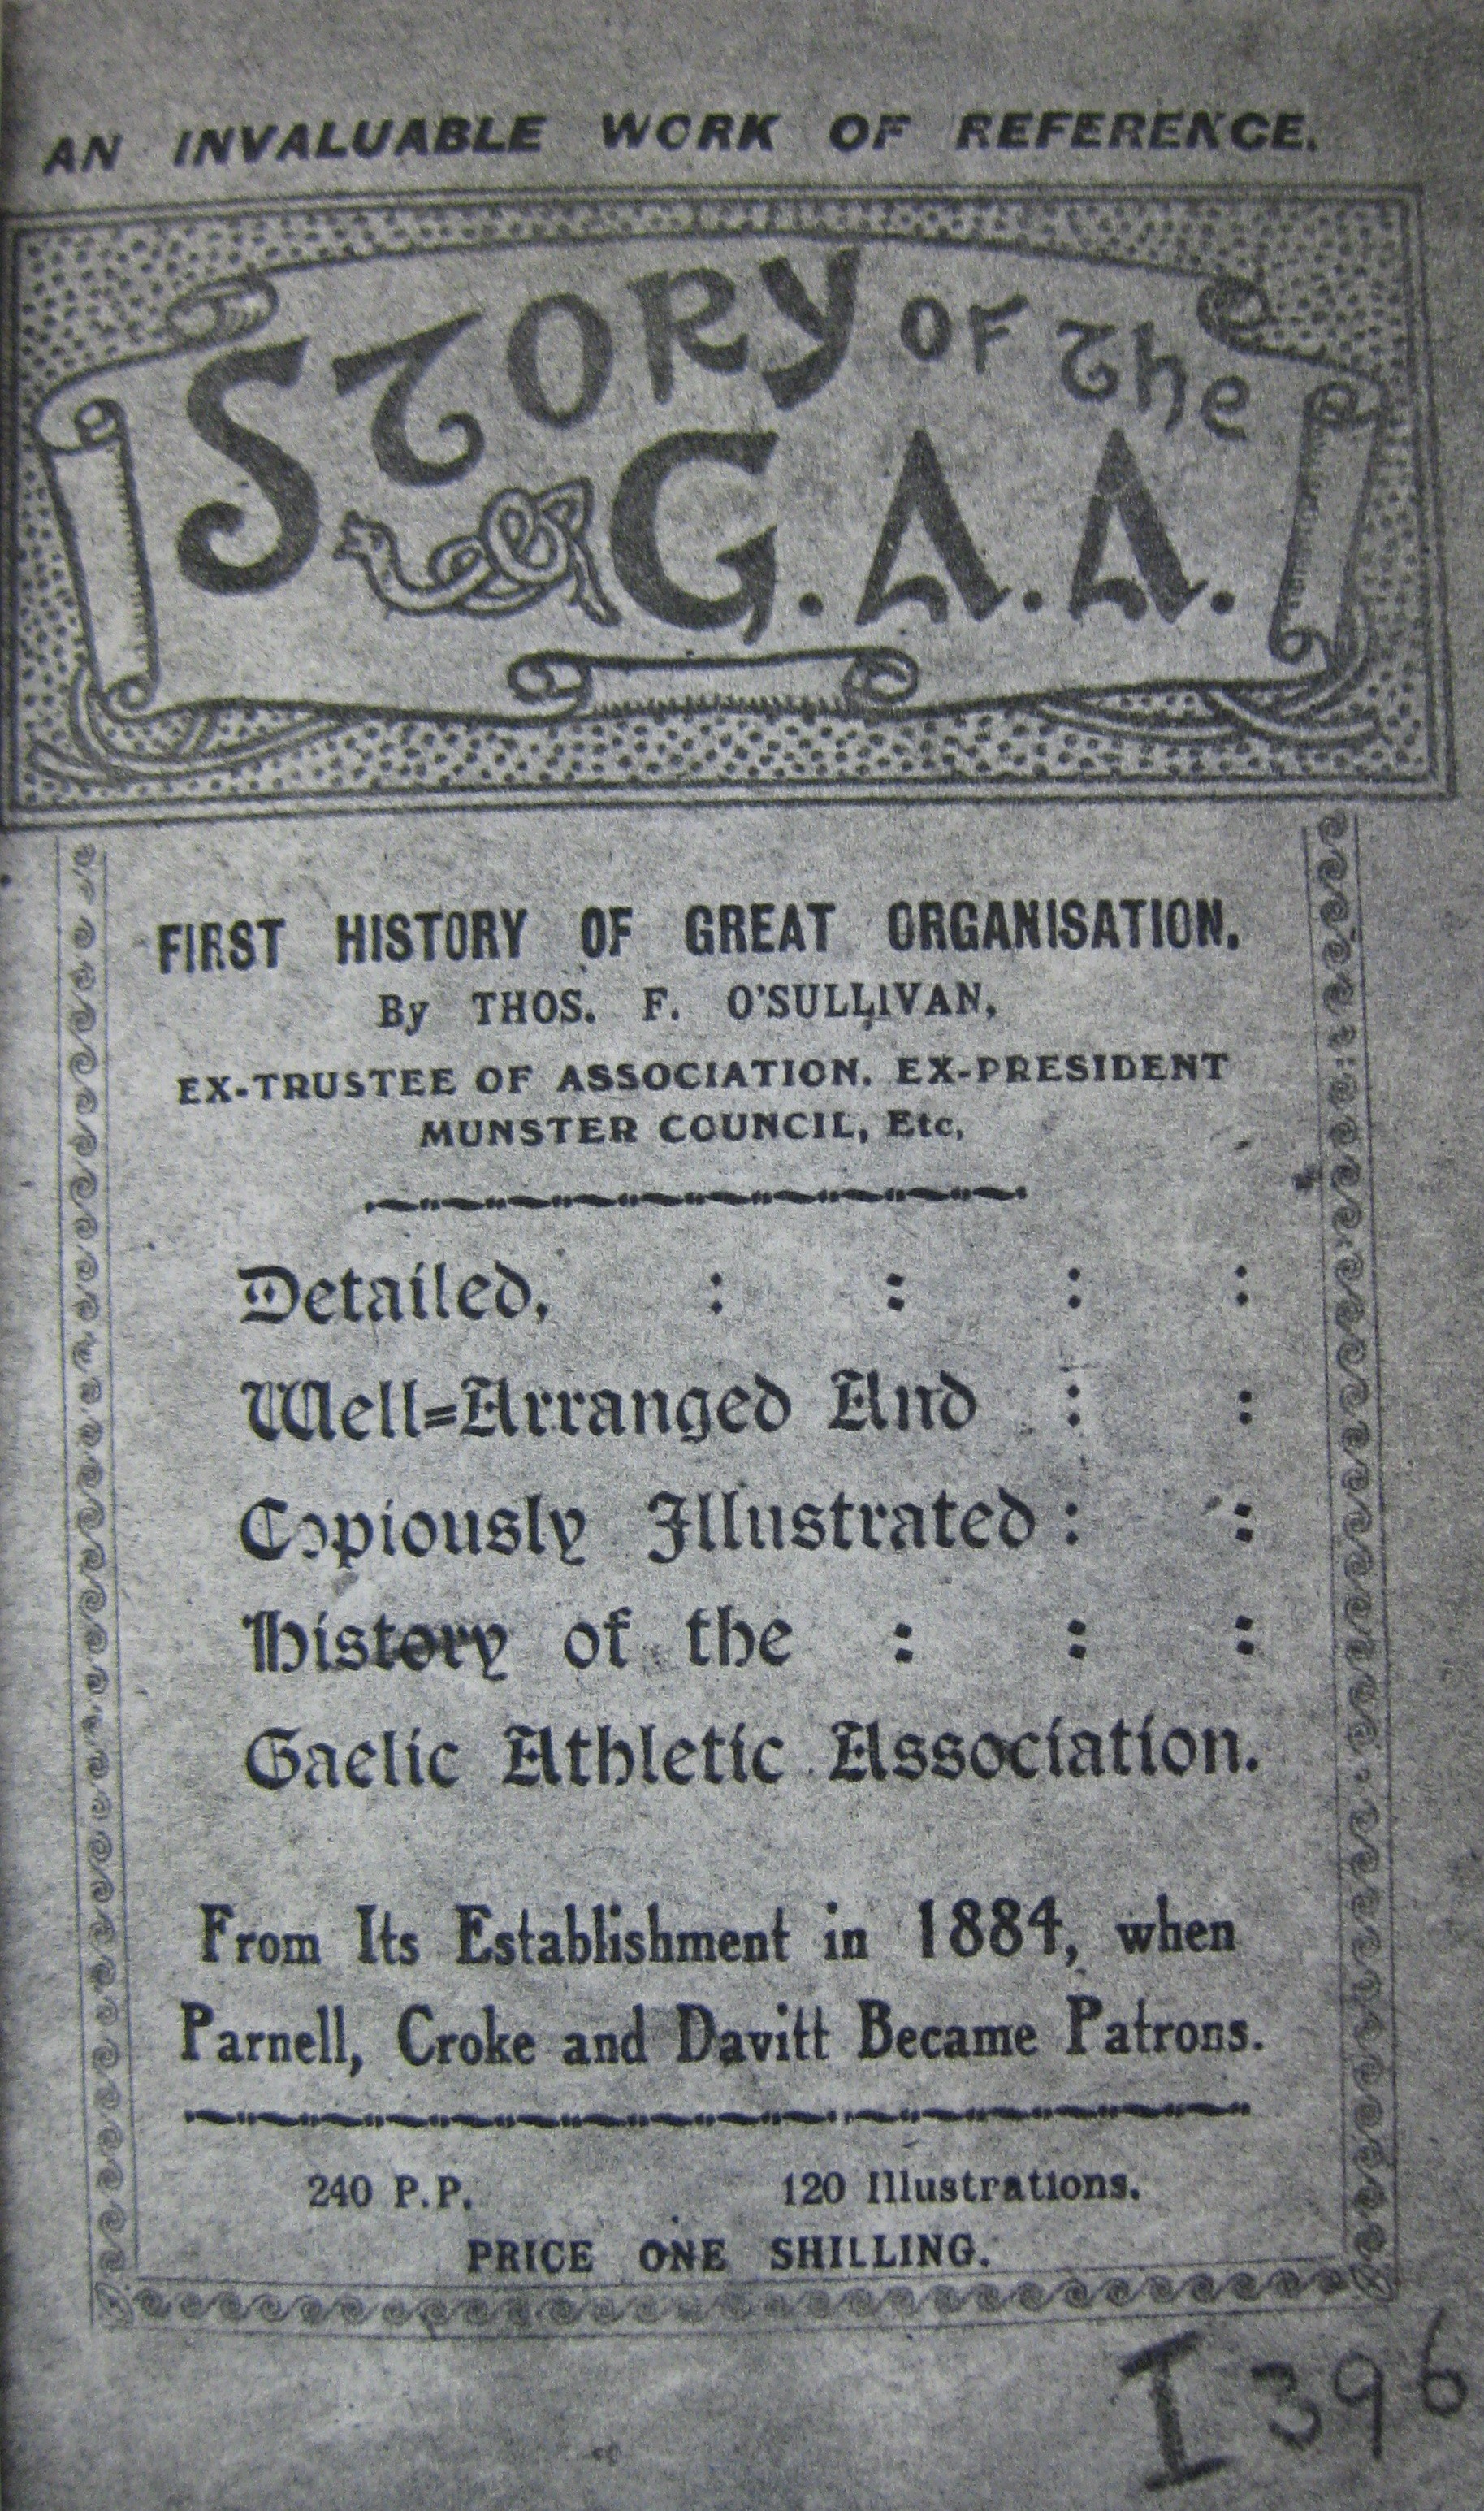 The front page of the first history of the GAA written by T.F. O'Sullivan in 1916.